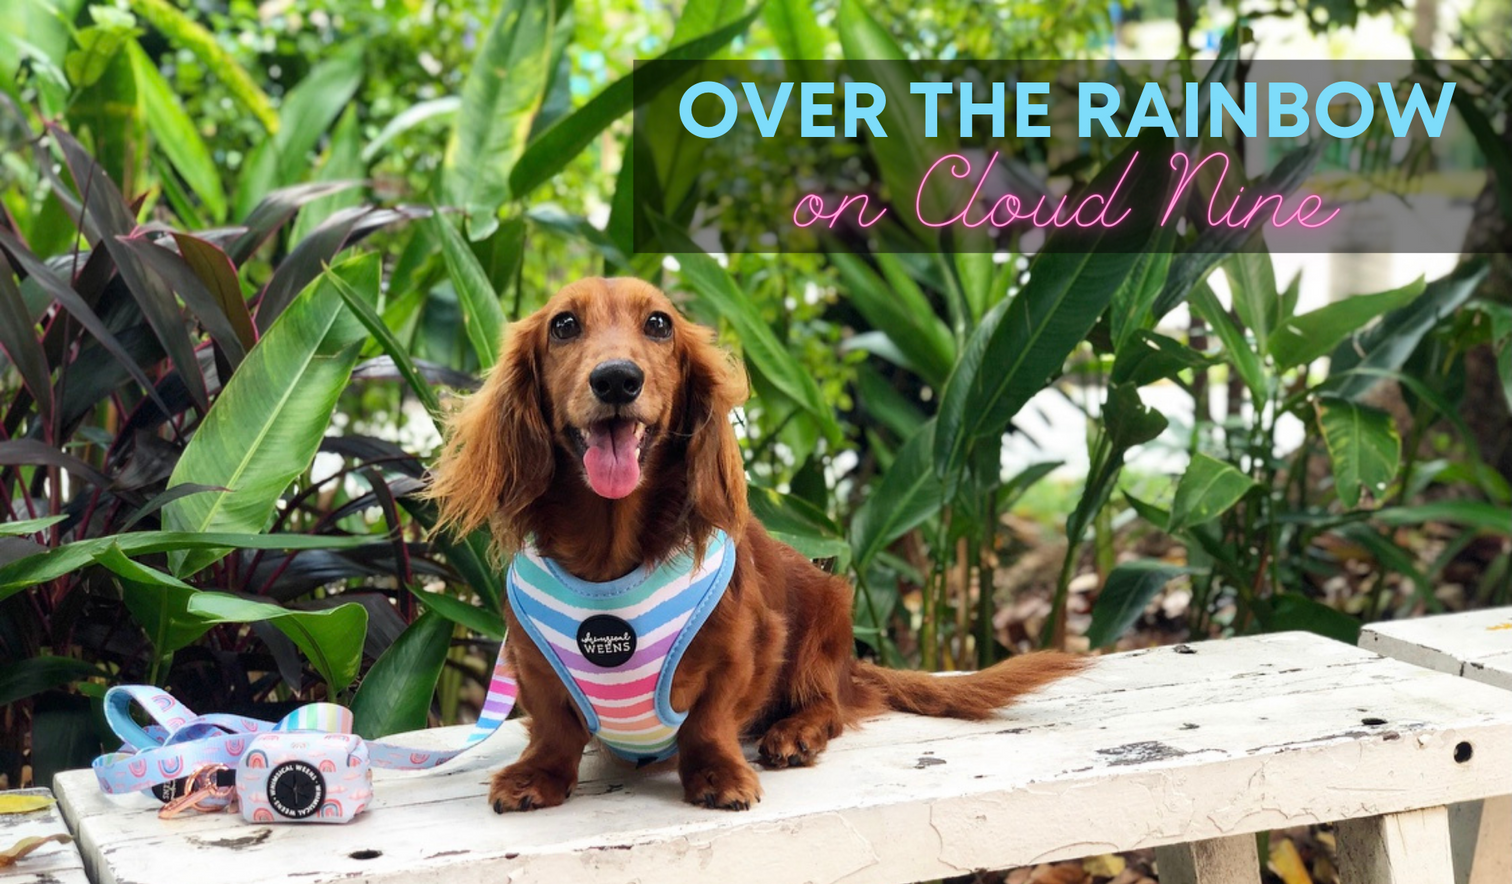 Whimsical and cute designer accessories for pups & humans